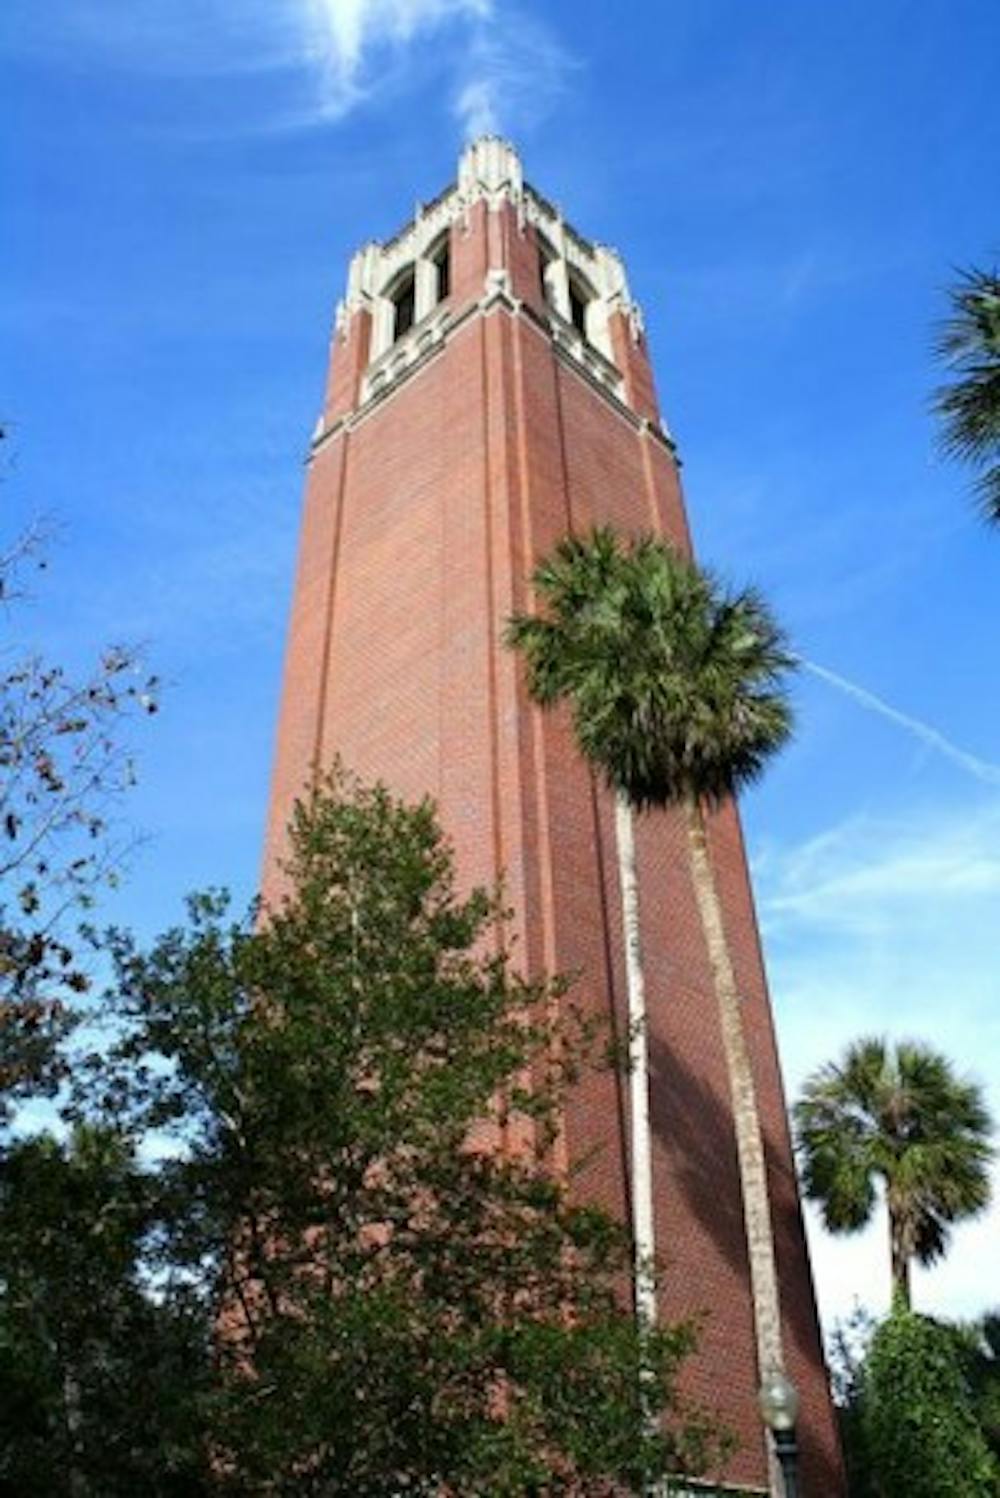 <p>UF tied for eighth place&nbsp;in the U.S. News and World Report’s 2019 list of top public universities. That is one place higher than last year's ranking.</p>